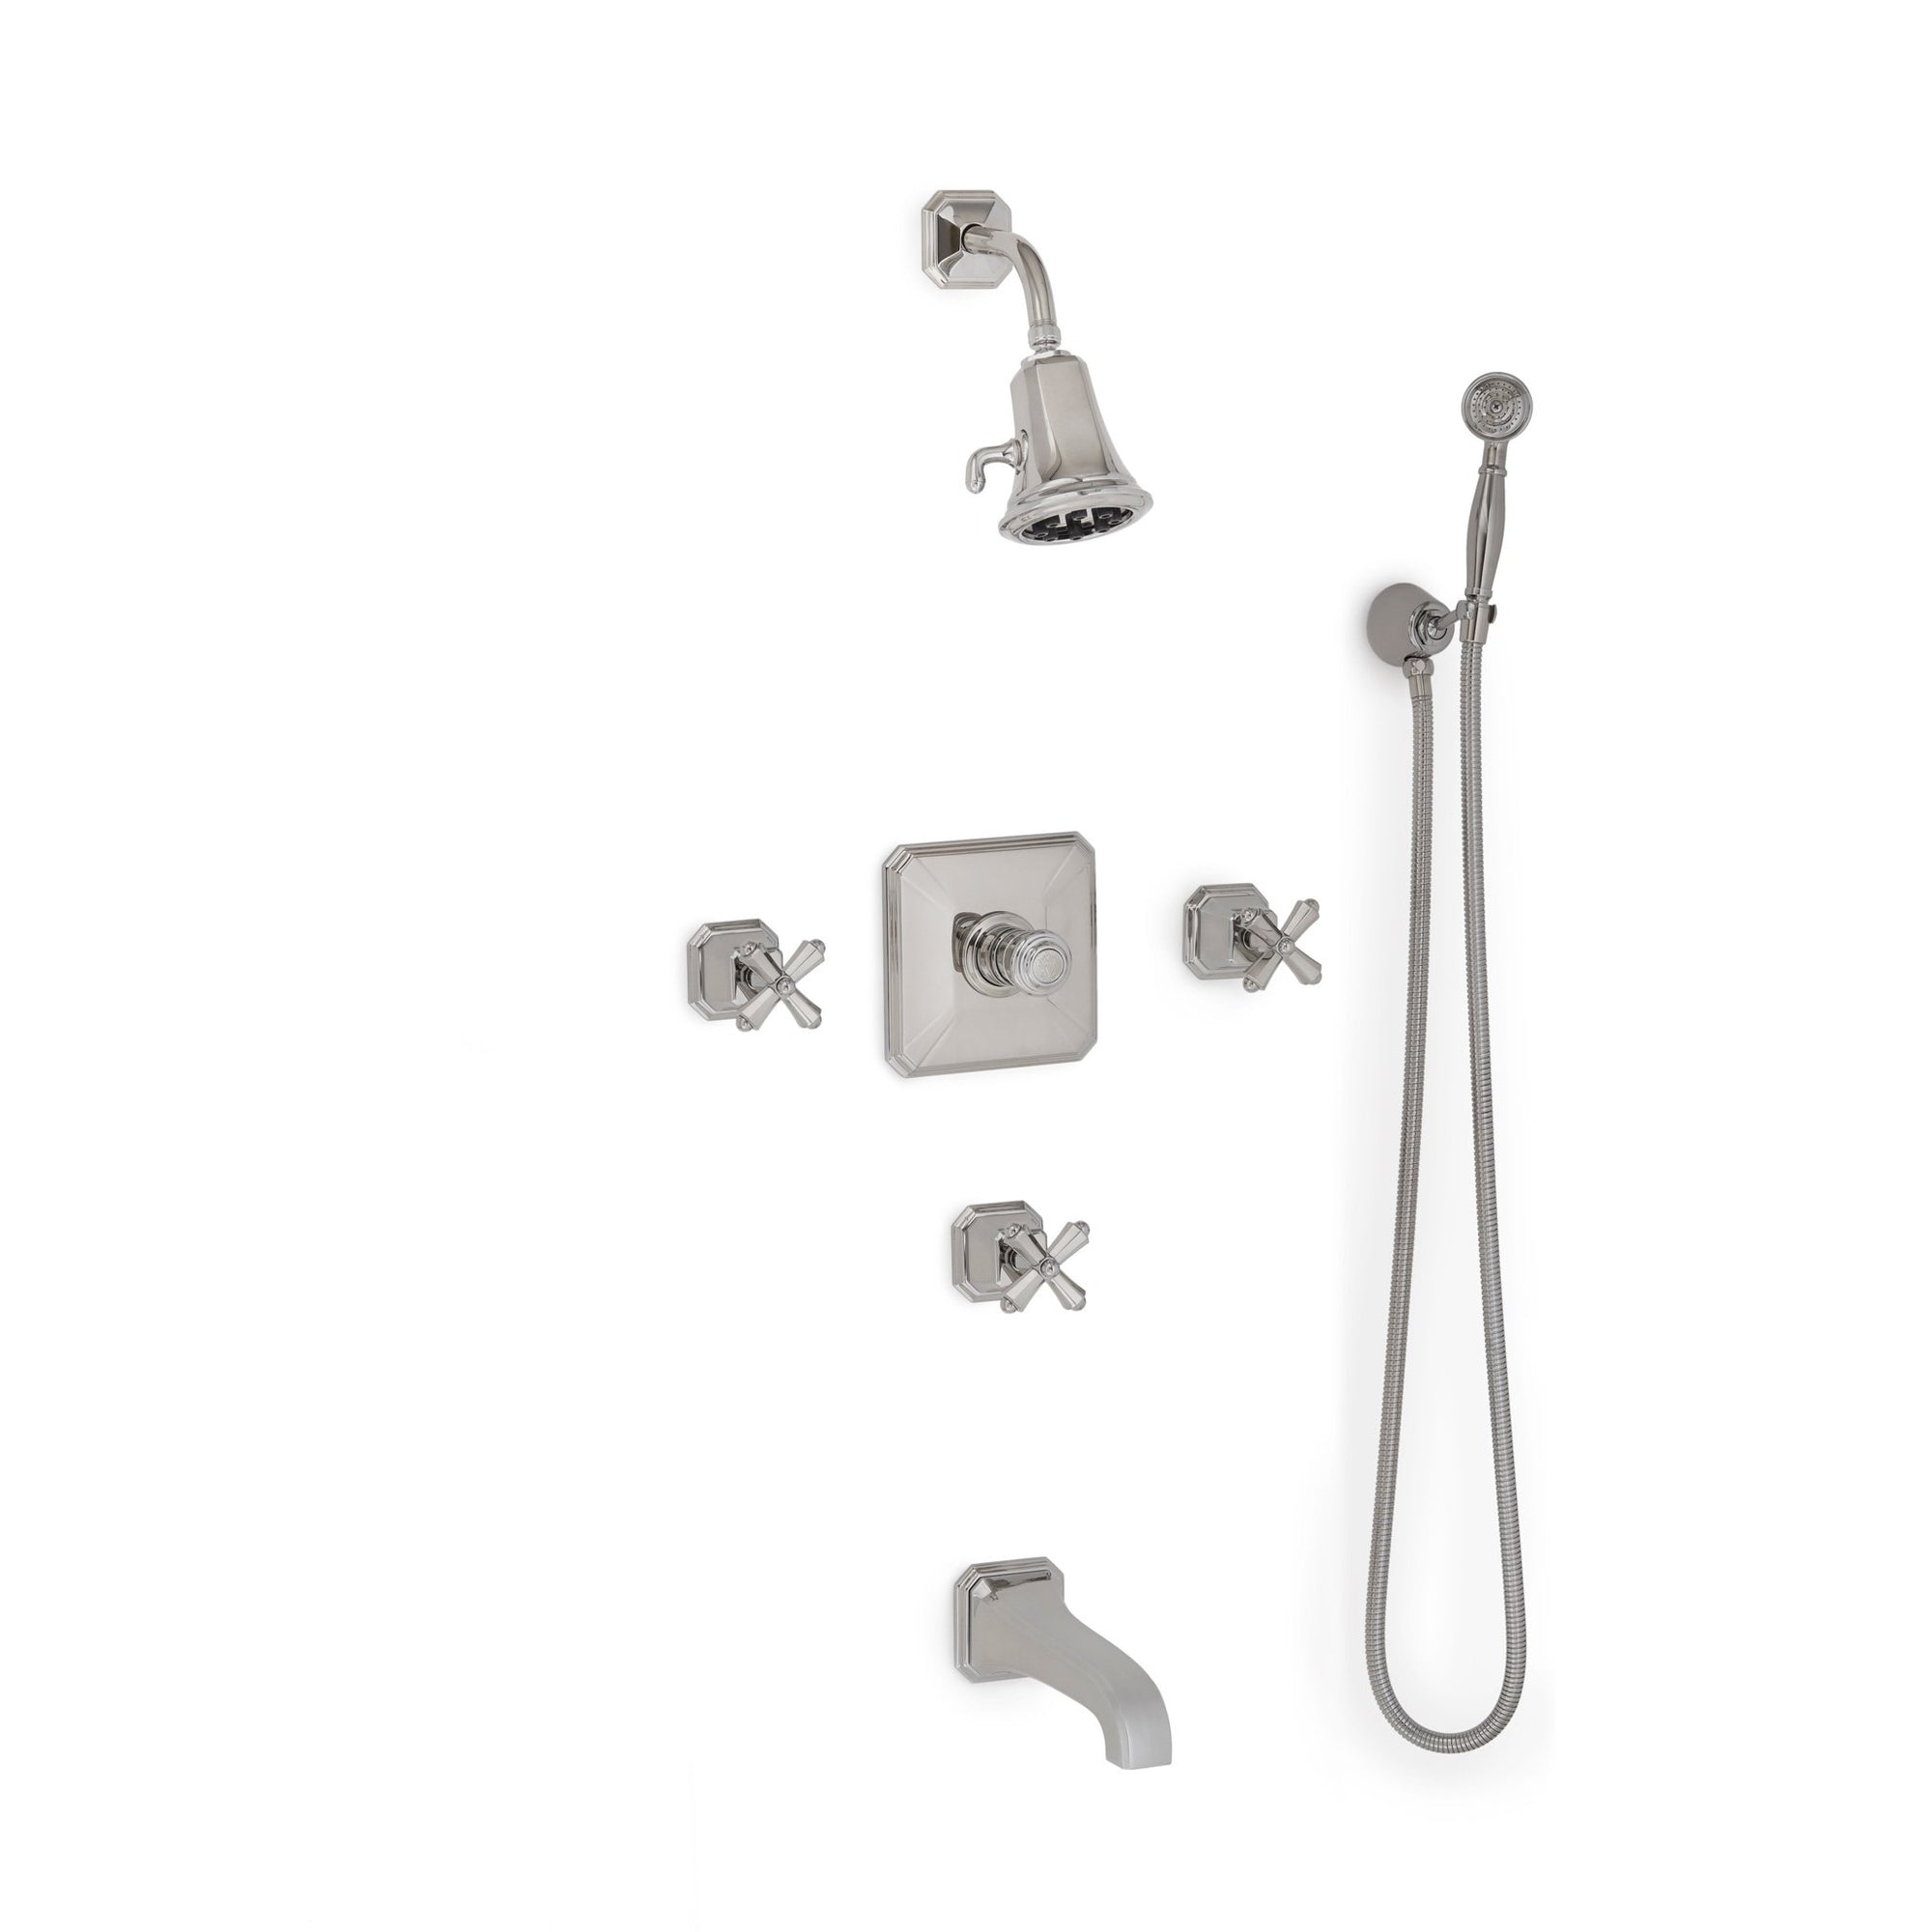 Sherle Wagner International Harrison Cross Handle High Flow Thermostatic Shower and Tub System in Polished Chrome metal finish